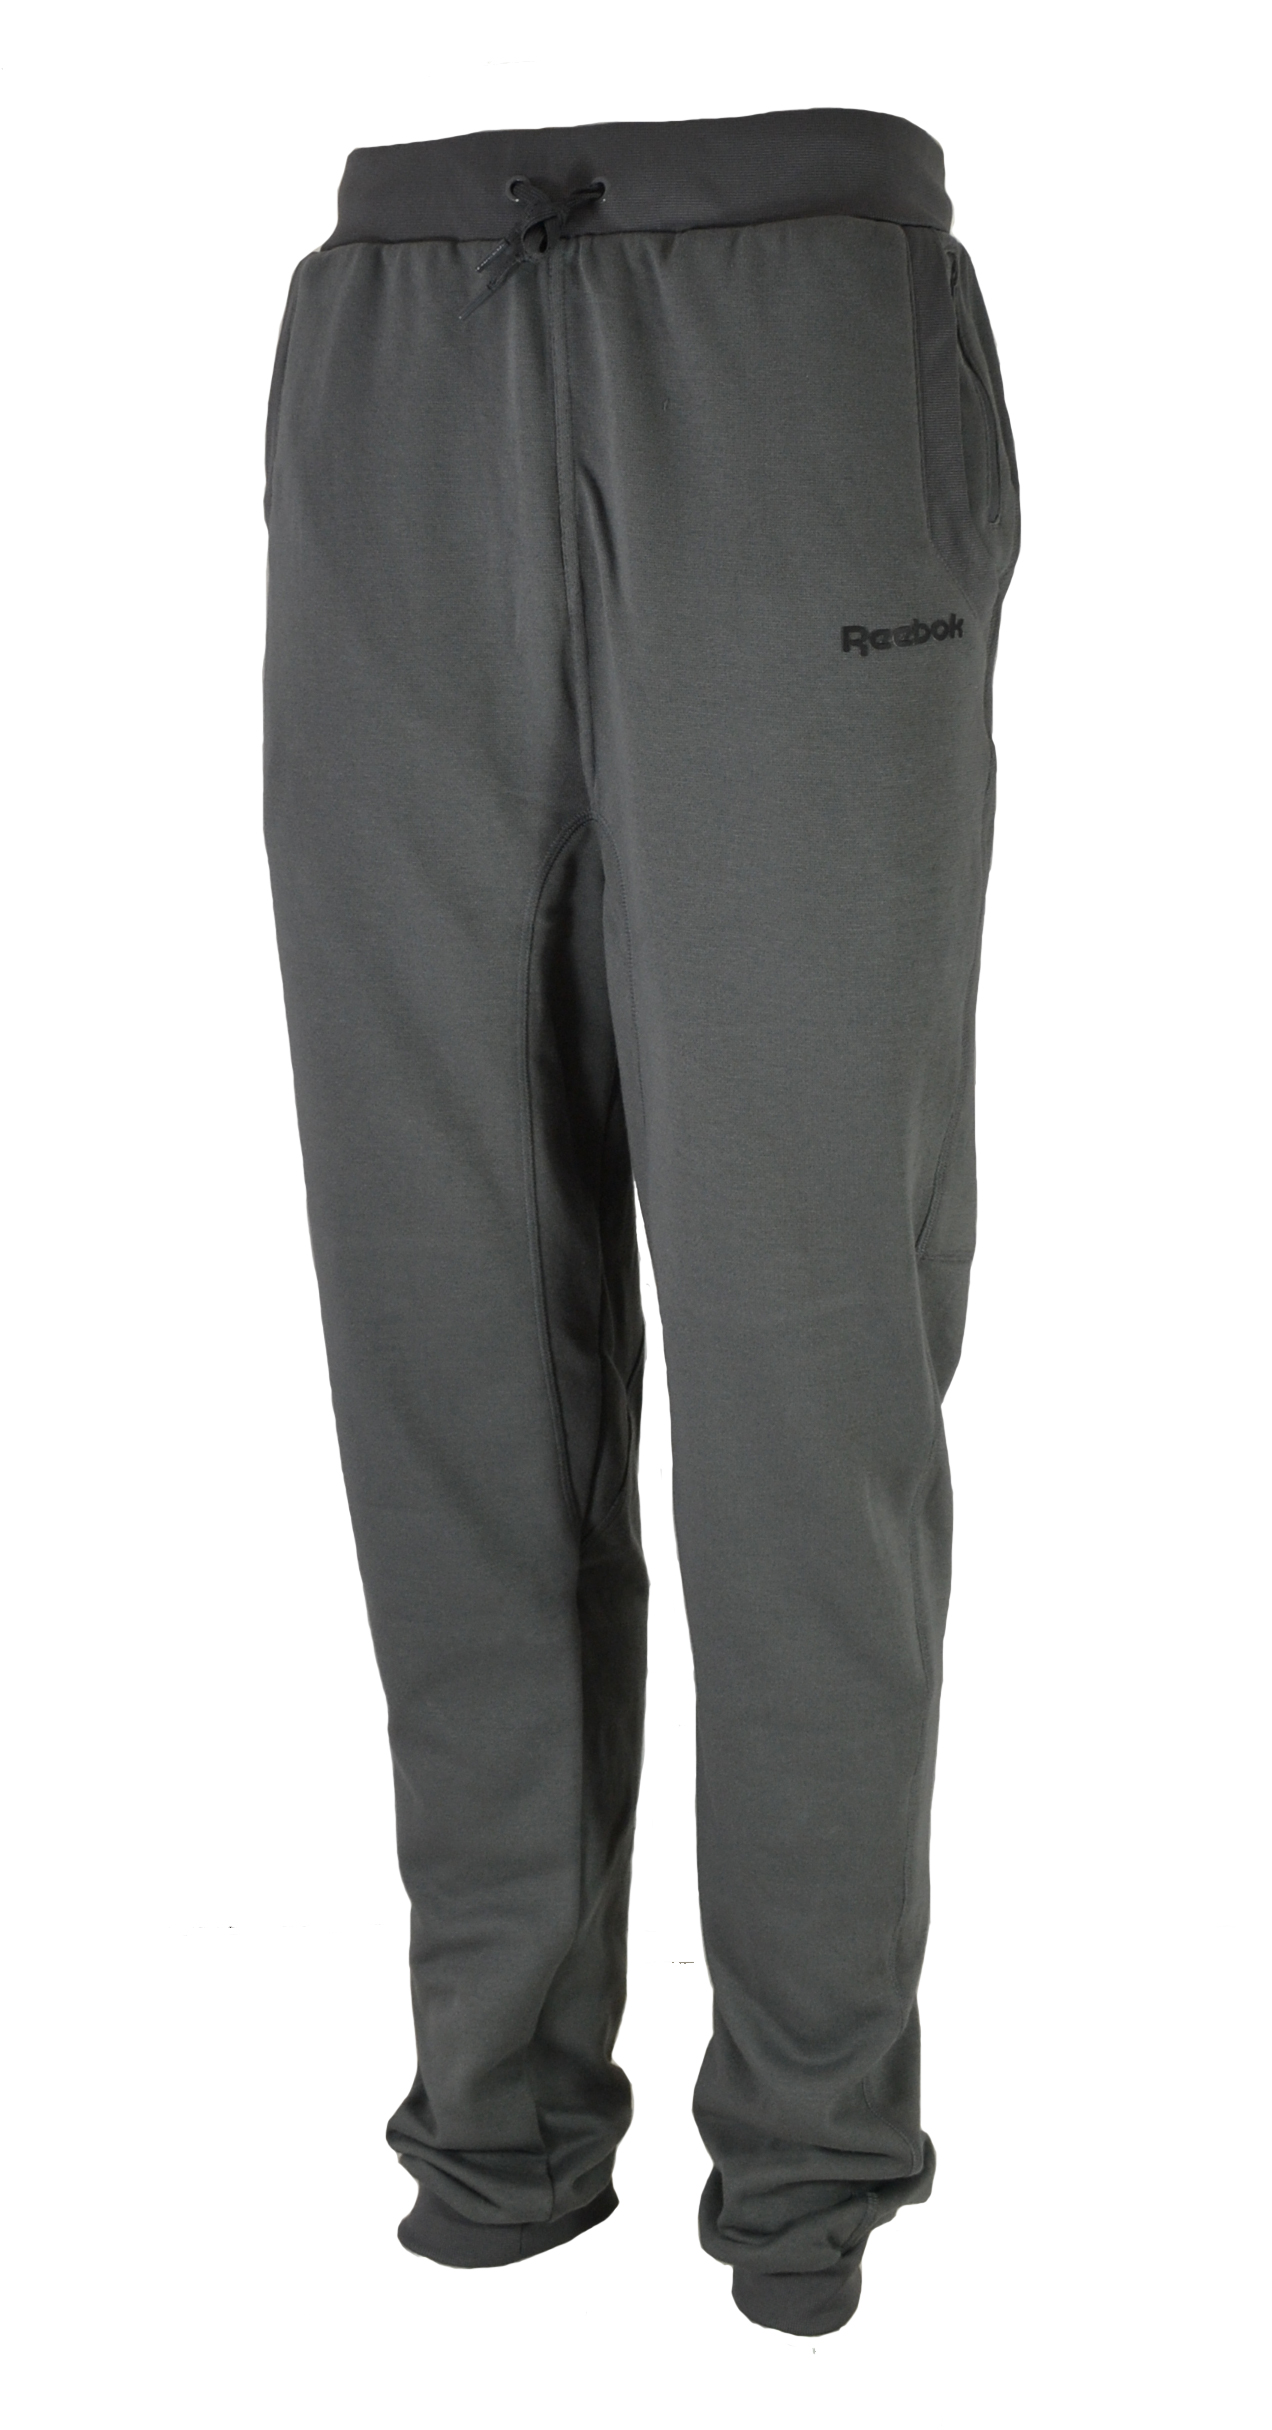 New Reebok Men's Tracksuit Bottoms Slim Fit Play Dry Grey NCL Pant S M ...